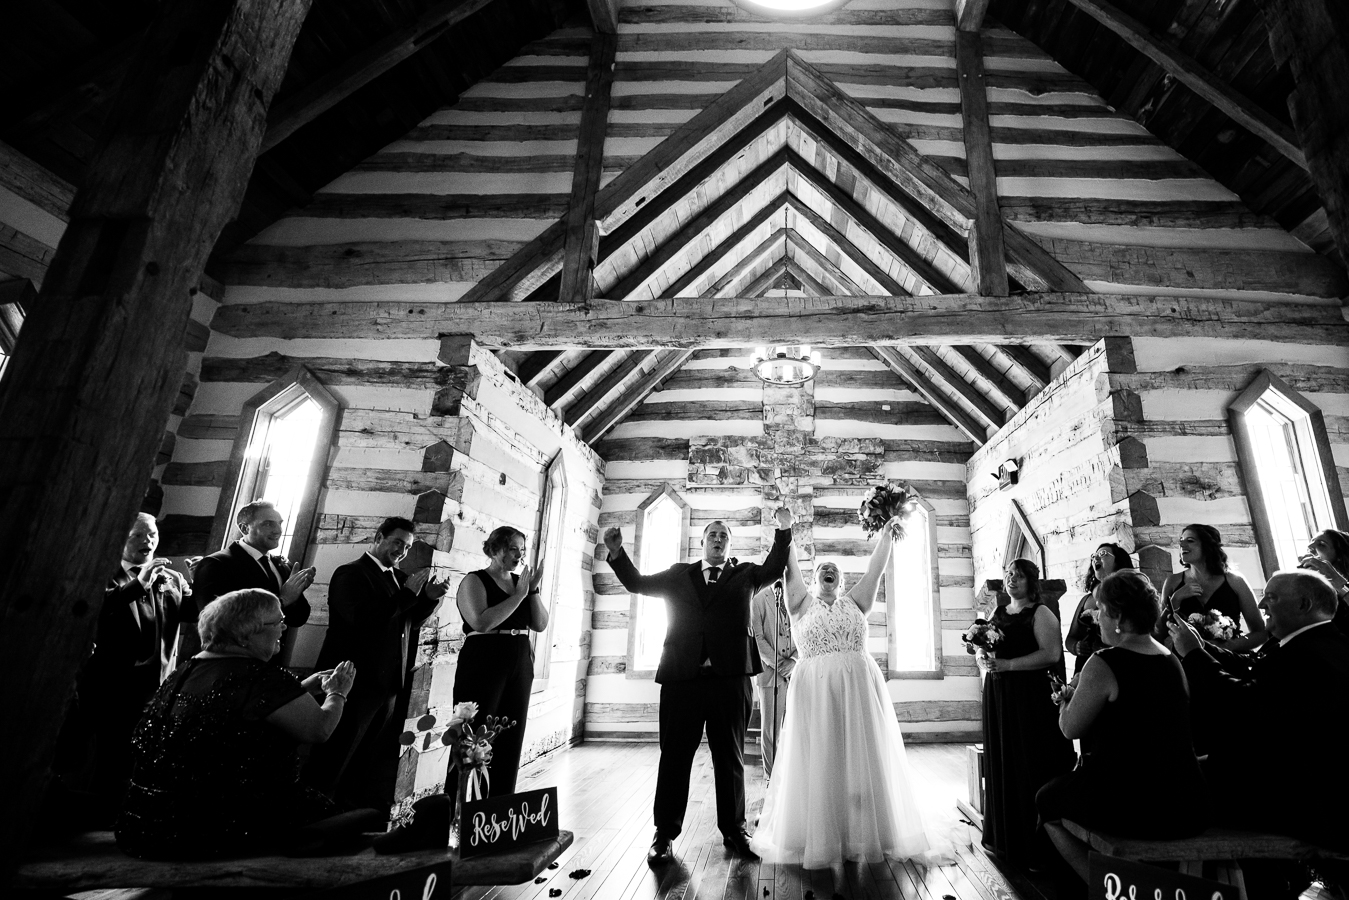 Oak Lodge Wedding Photographer, rhinehart photography, captures this happy moment when the bride and groom are finally married and cheering as their family and friends clap for them inside of this cozy log chapel on the property of oak lodge 